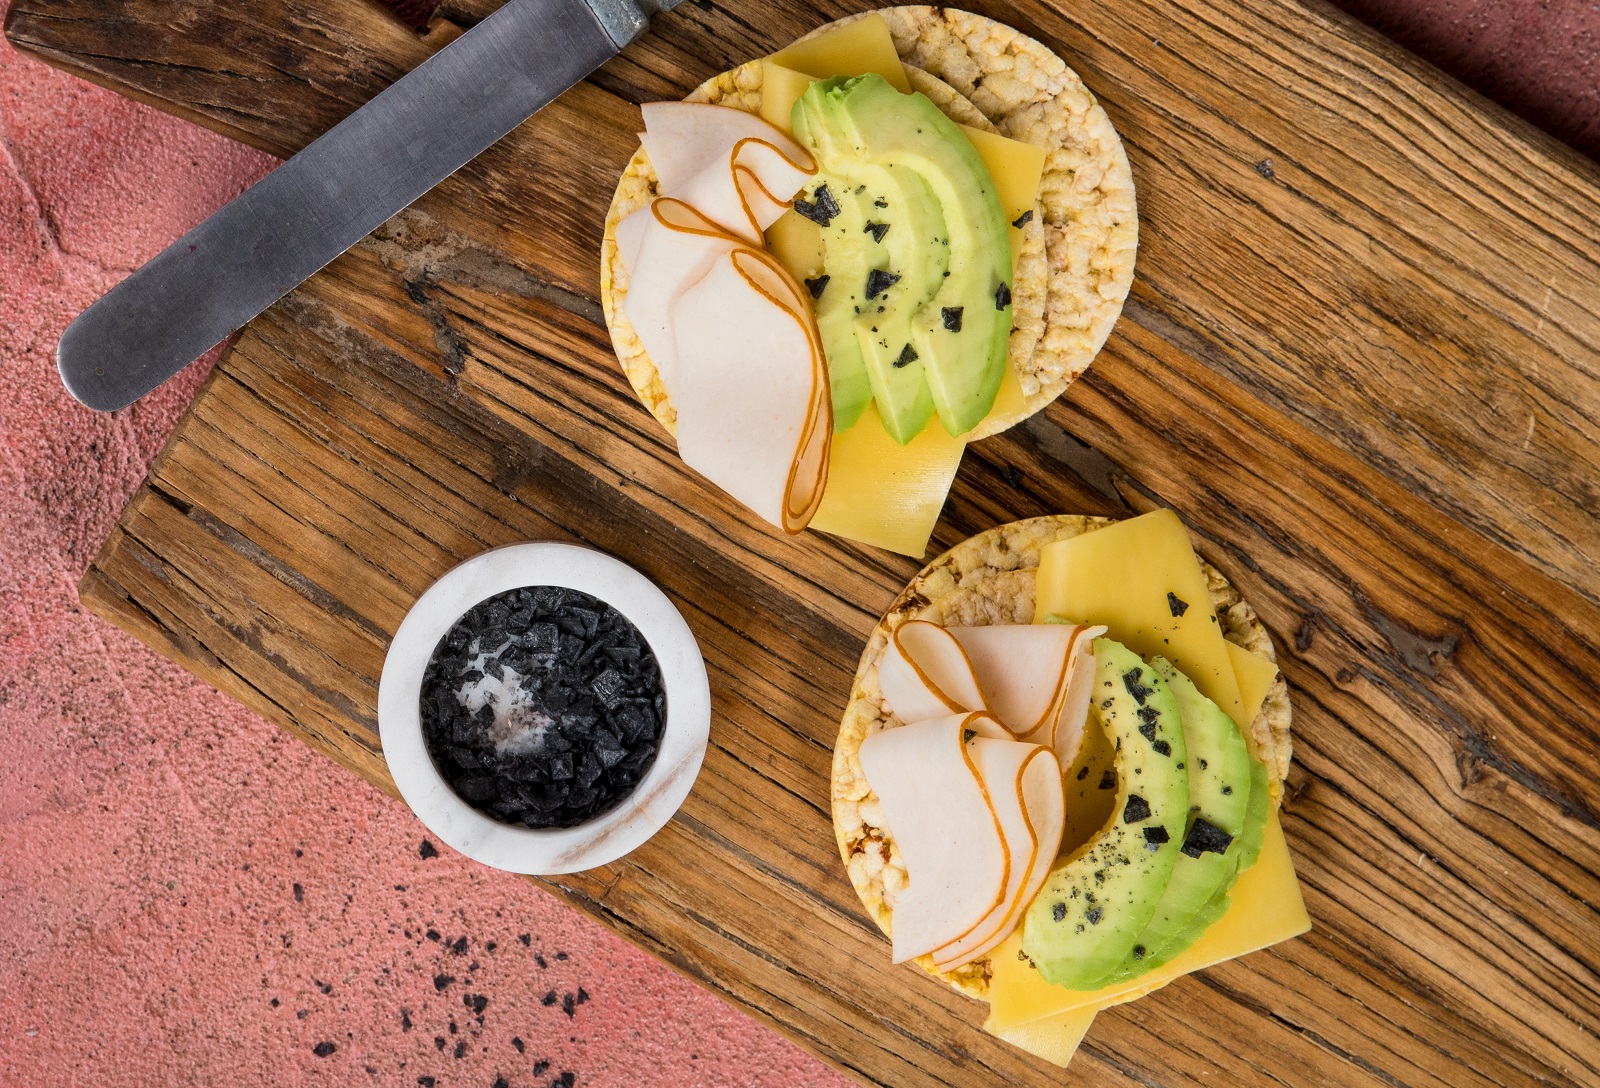 Shaved Chicken, cheese & avocado on Corn Thins slices